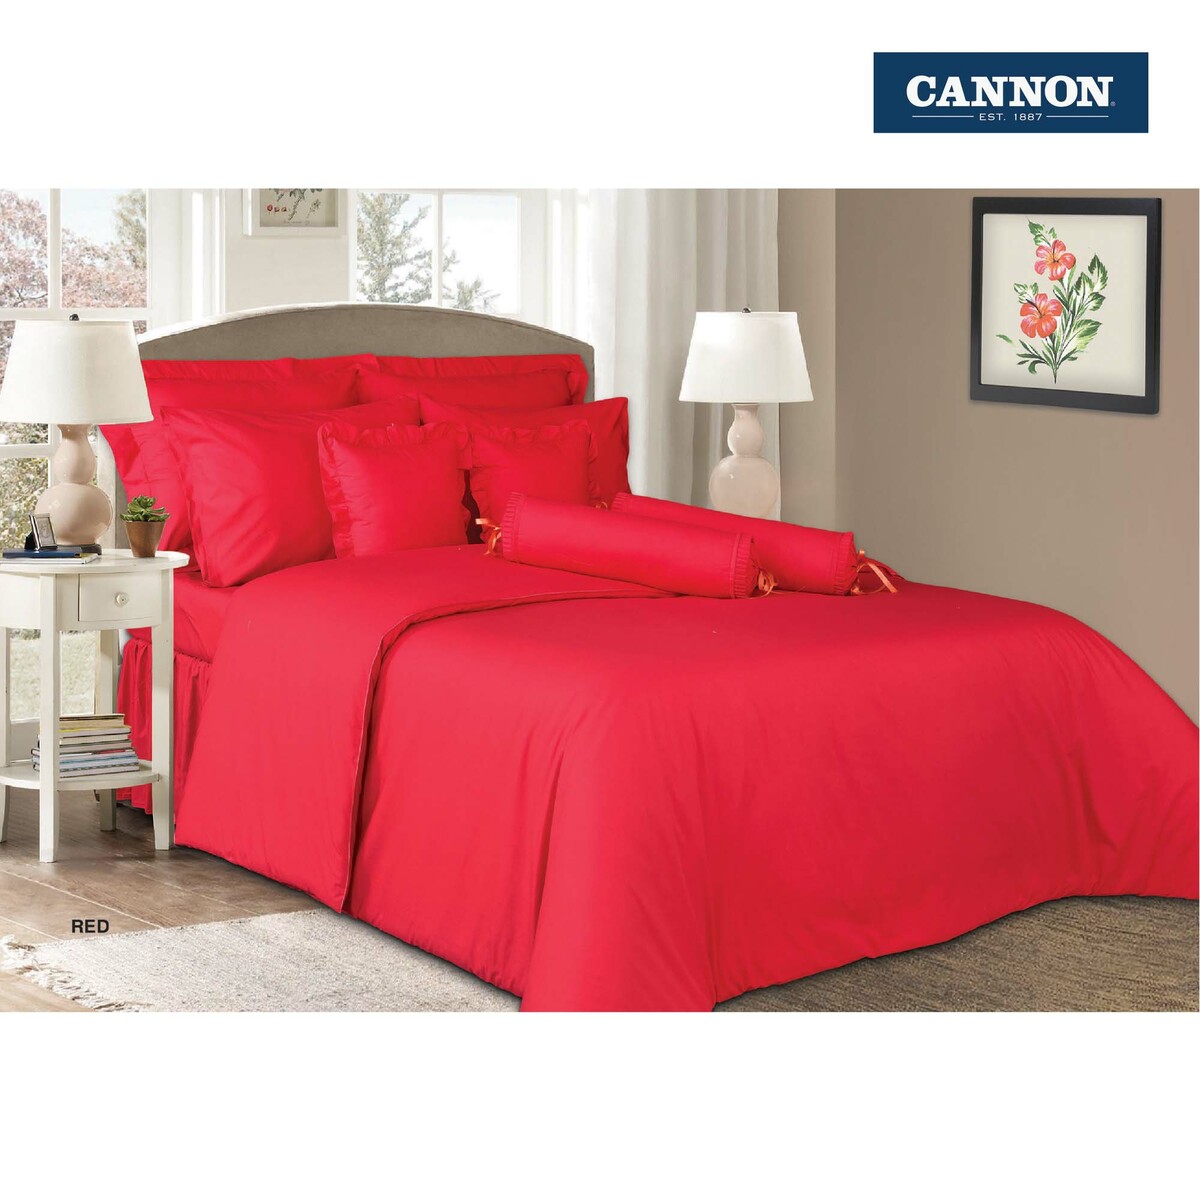 Cannon Fitted Sheet 2pcs Pillow Cover, Red Bed Sheets King Size